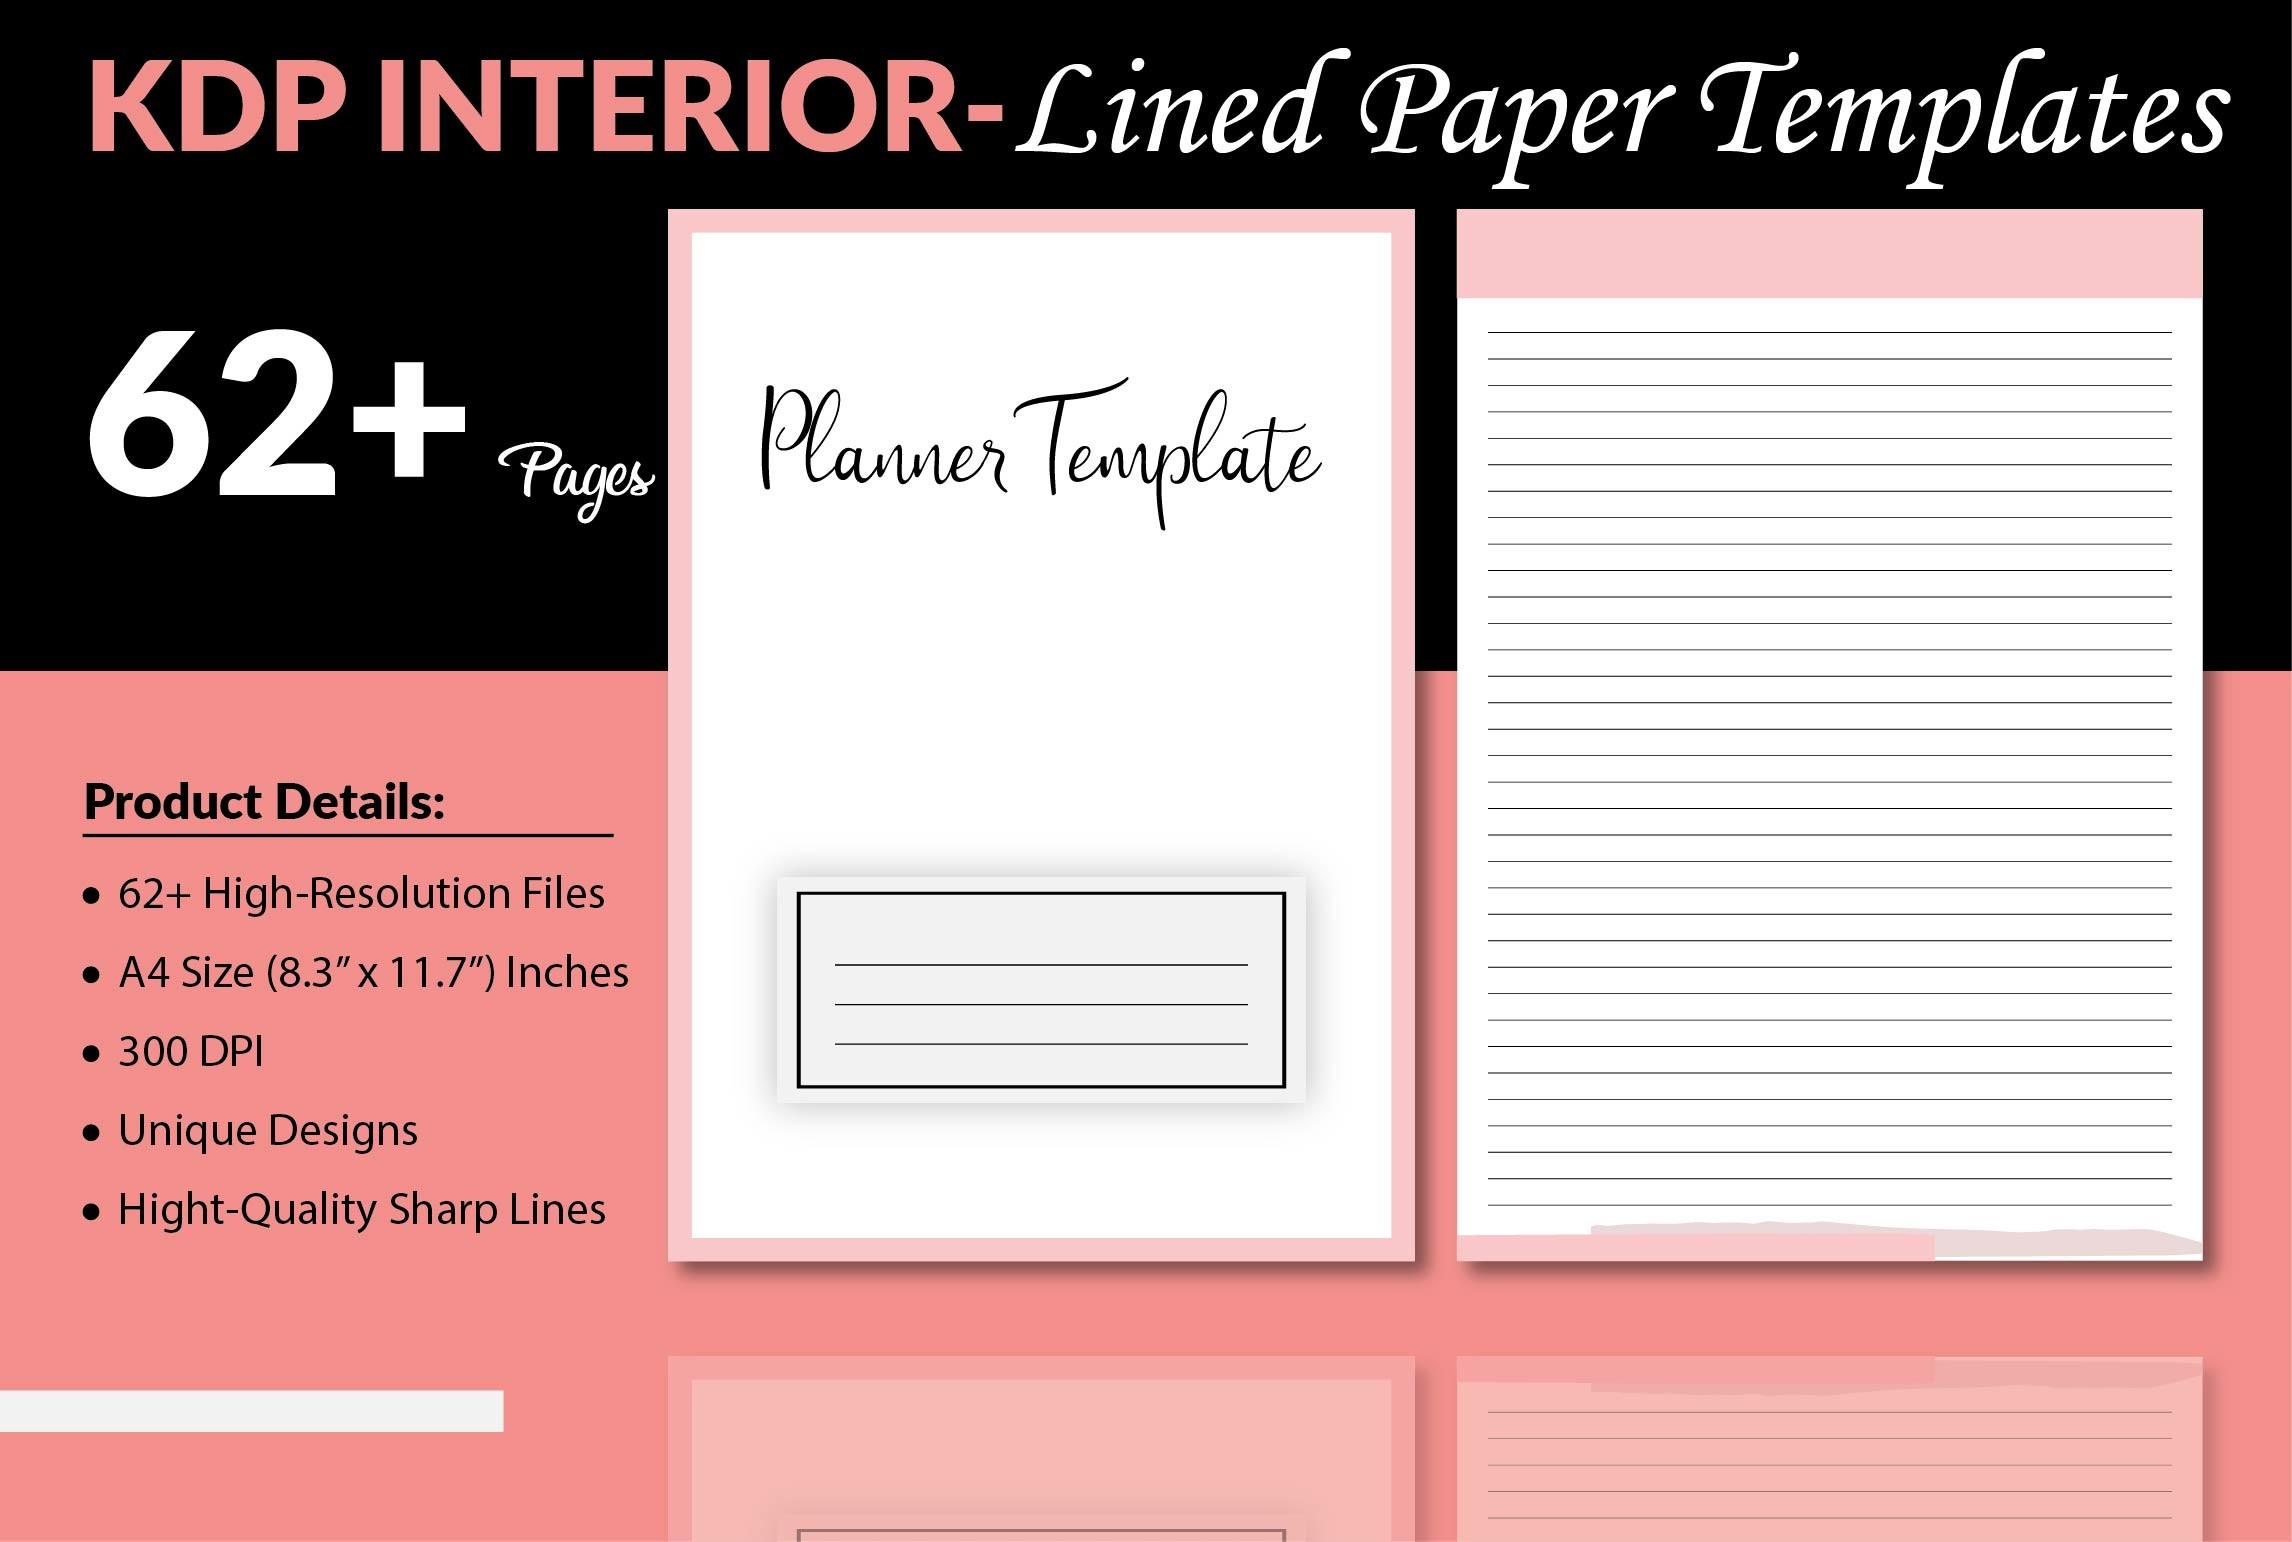 Lined Paper Templates - KDP Interior